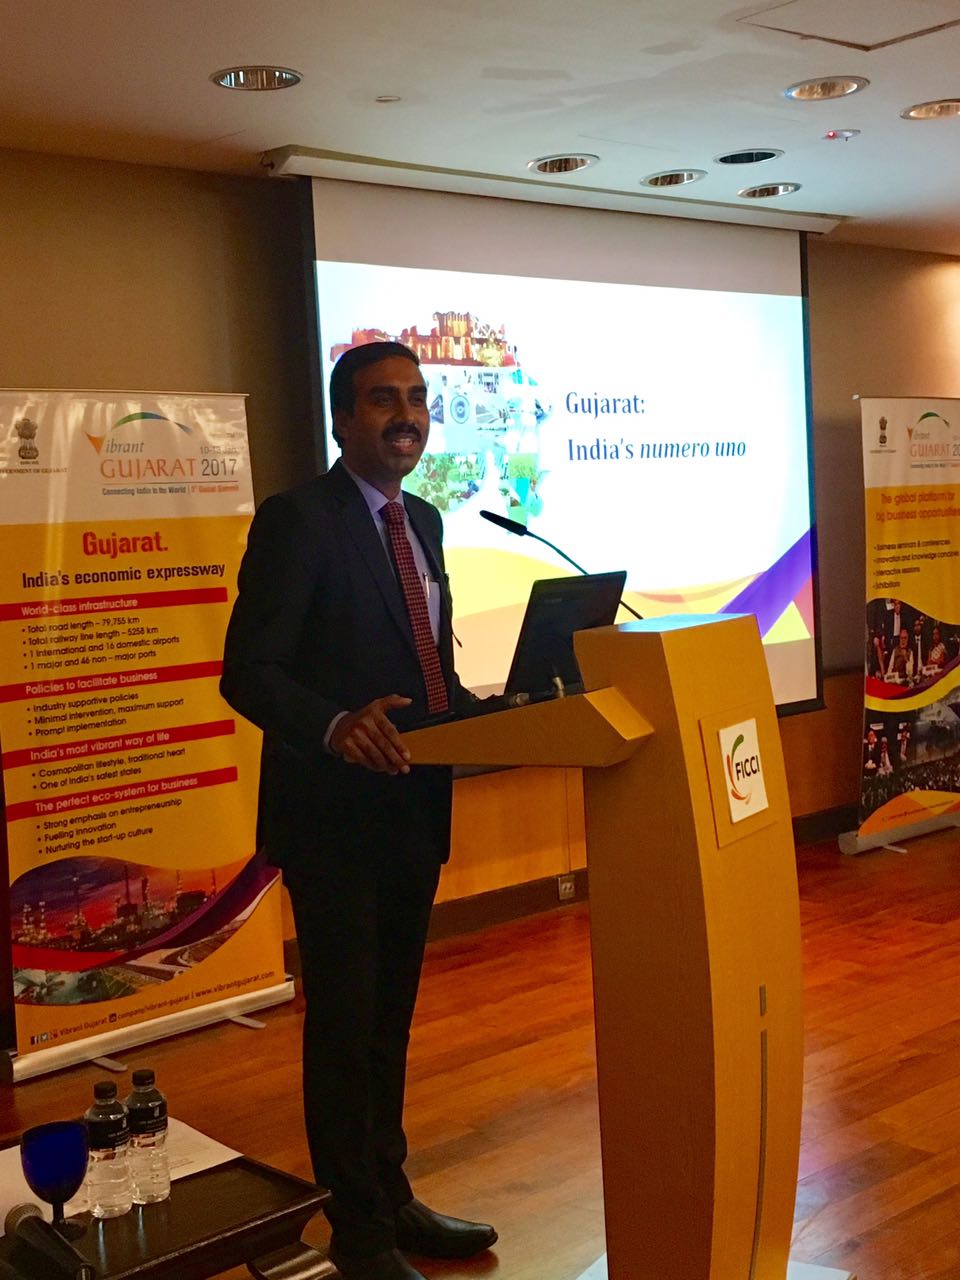 Delegation Leader from Indian state Gujarat at the roadshow in Singapore (3)